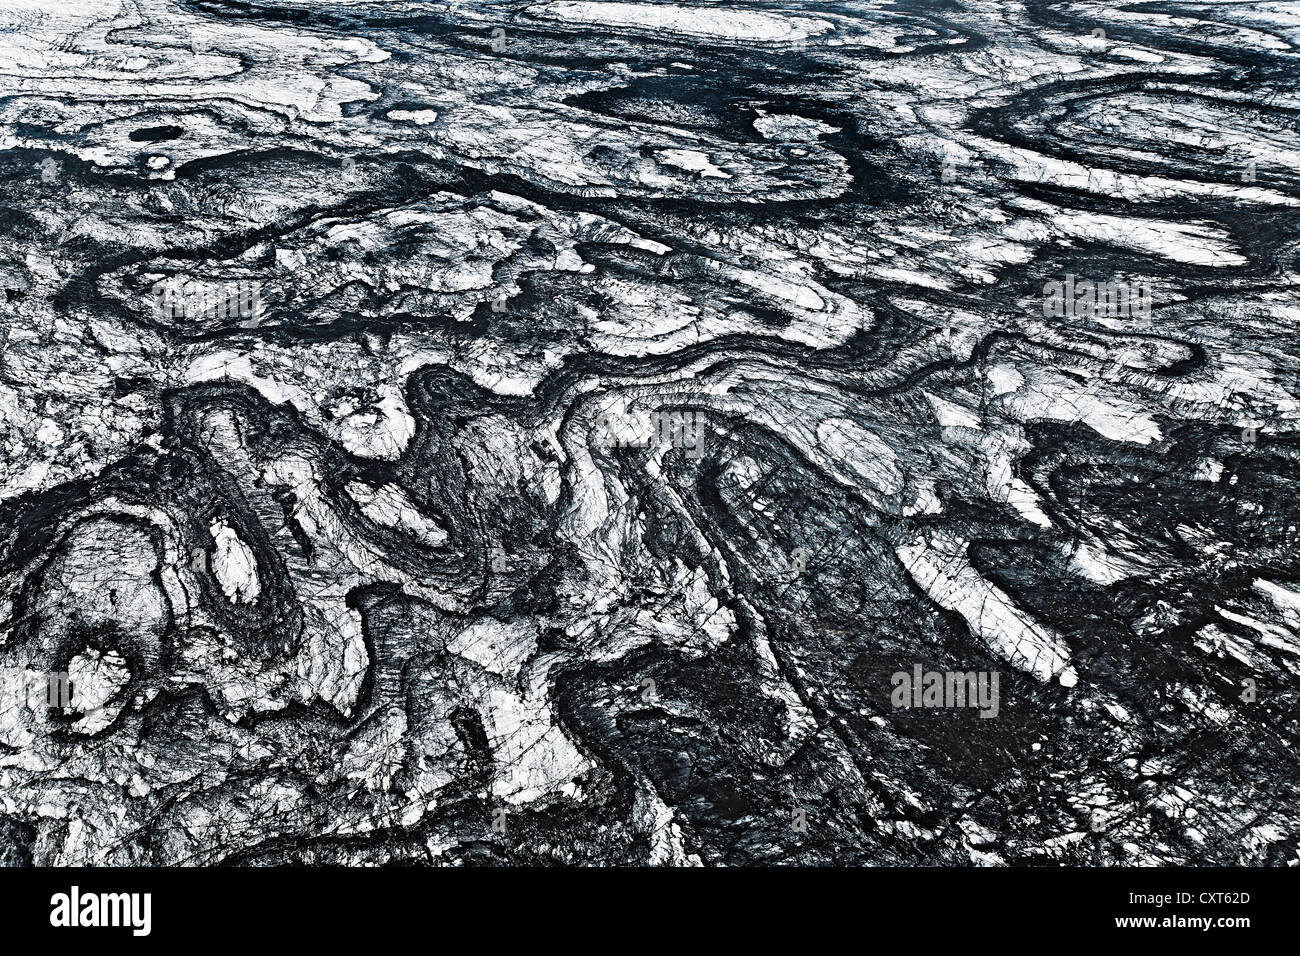 Aerial view, structures of volcanic ash and black lava in the ice and snow of the Vatnajoekull glacier, Iceland, Europe Stock Photo